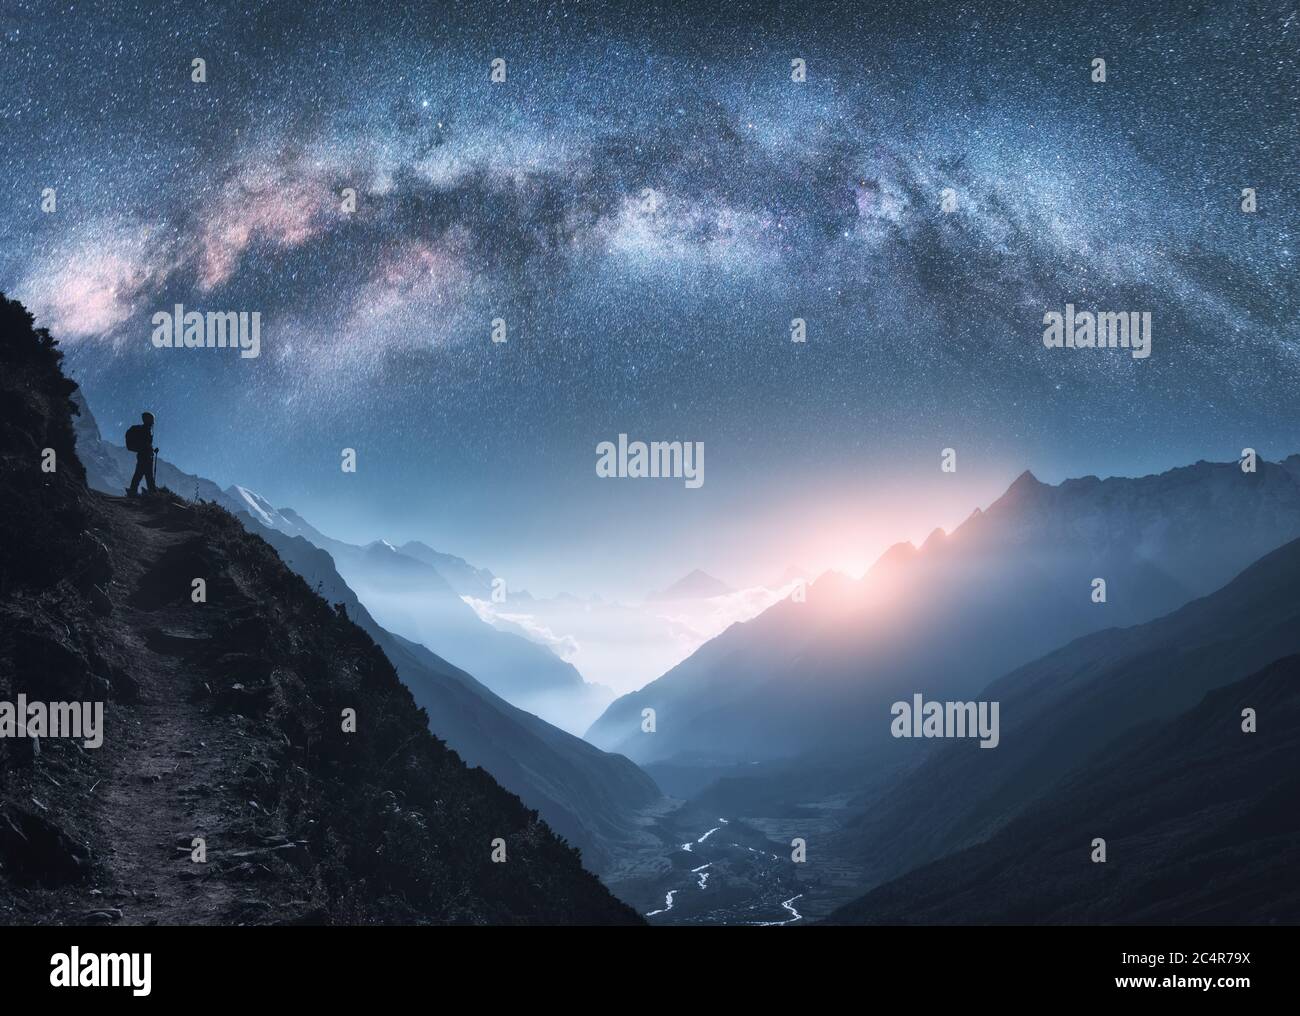 Arched Milky Way, woman and mountains at night Stock Photo